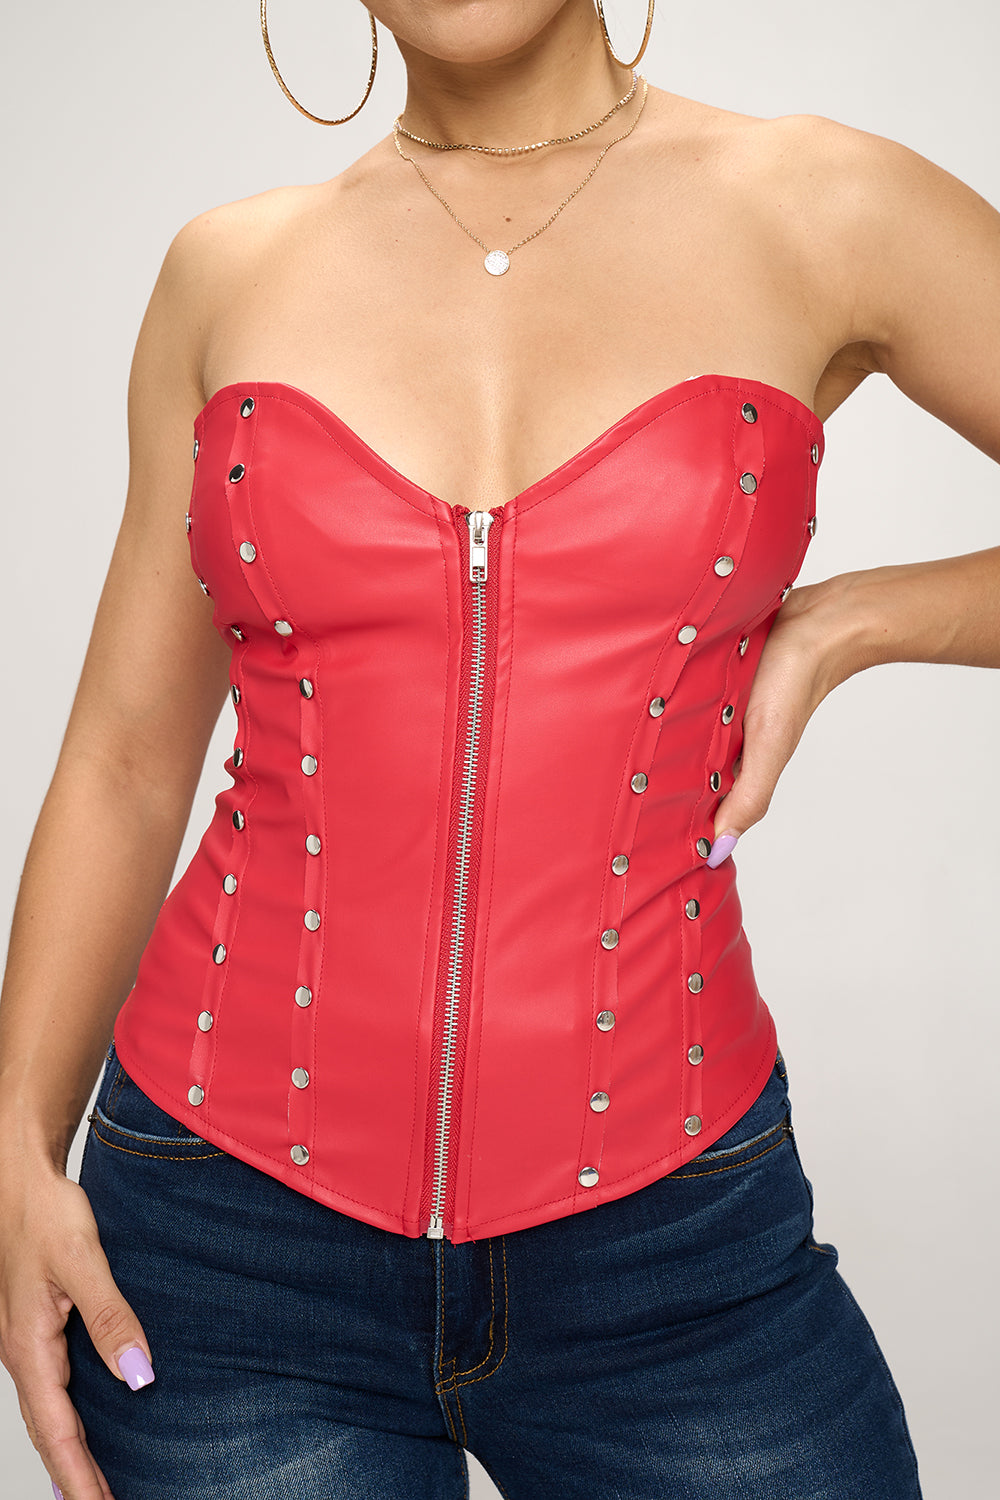 6 Buckle Zip Front Corset in Brown Leather VC1318R